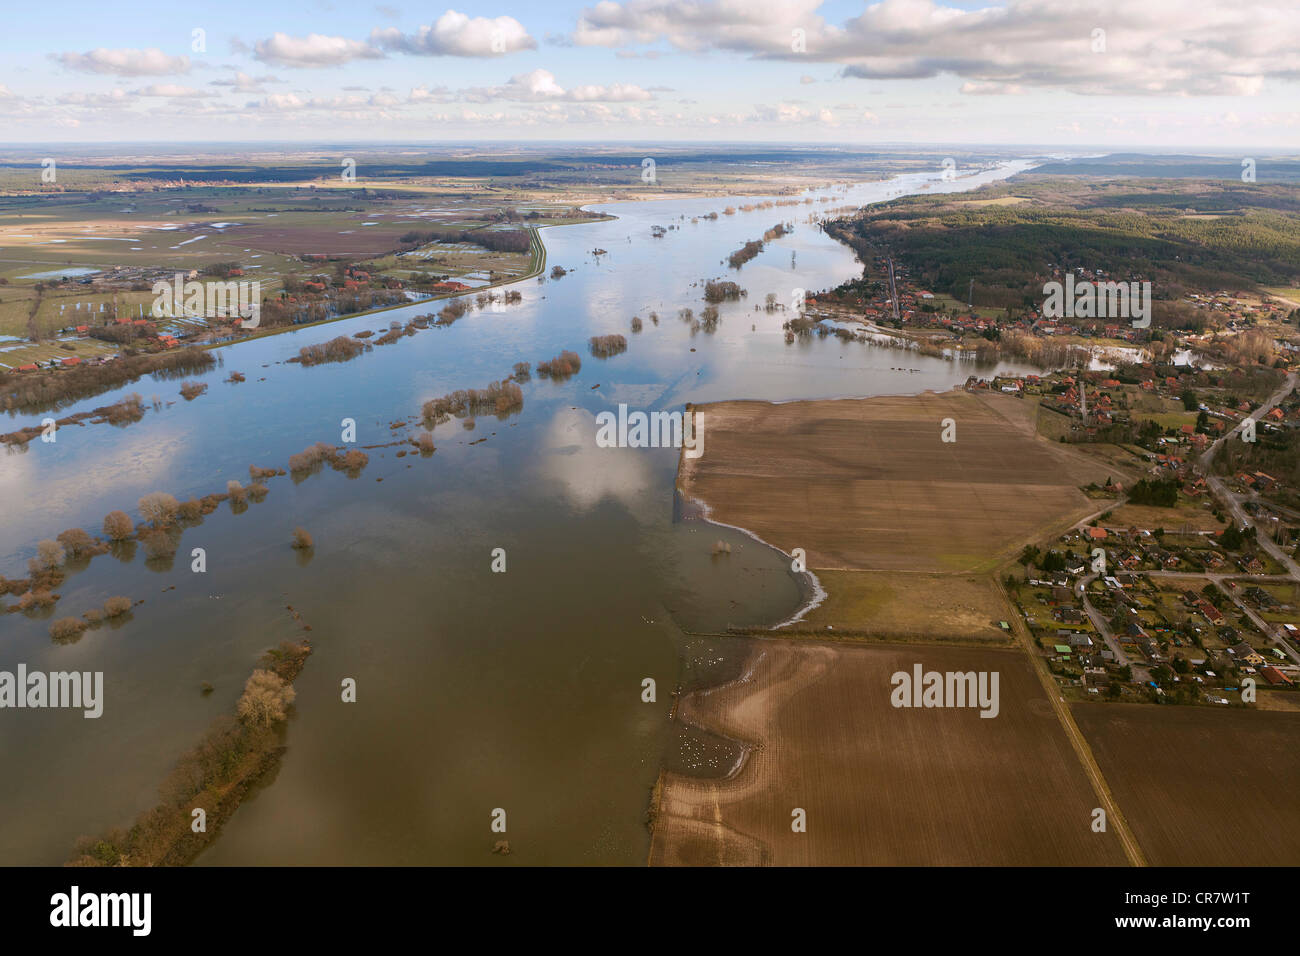 Aerial view, Neu Darchau, Elbe River, Elbe Valley Nature Park, winter floods, Lower Saxony, Germany, Europe Stock Photo